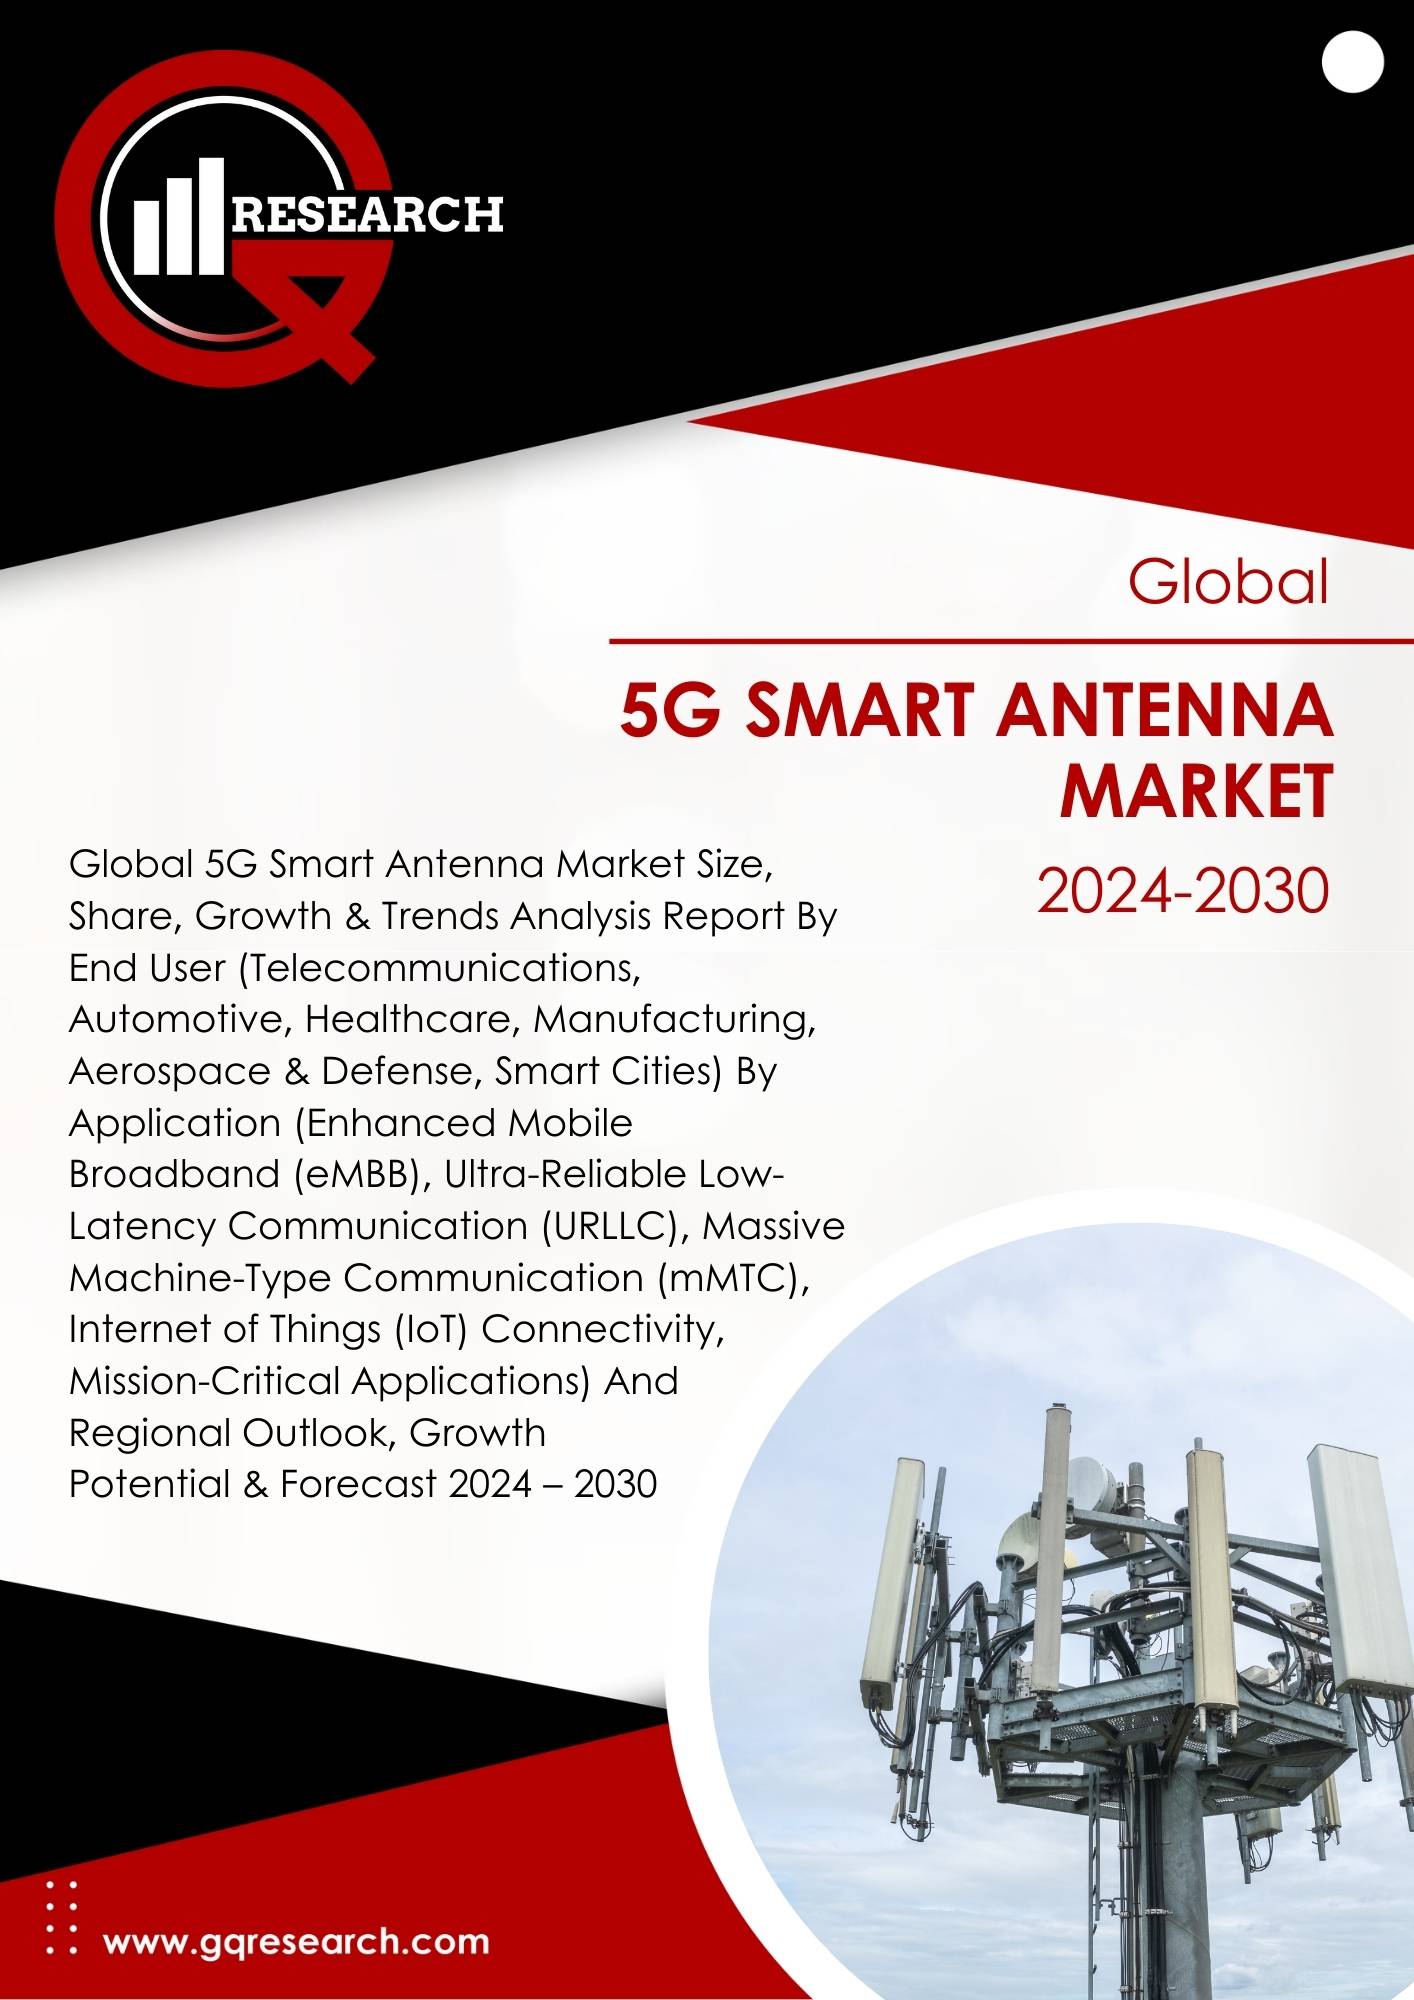 5G Smart Antenna Market Size, Share, Growth and Forecast to 2030 | GQ Research